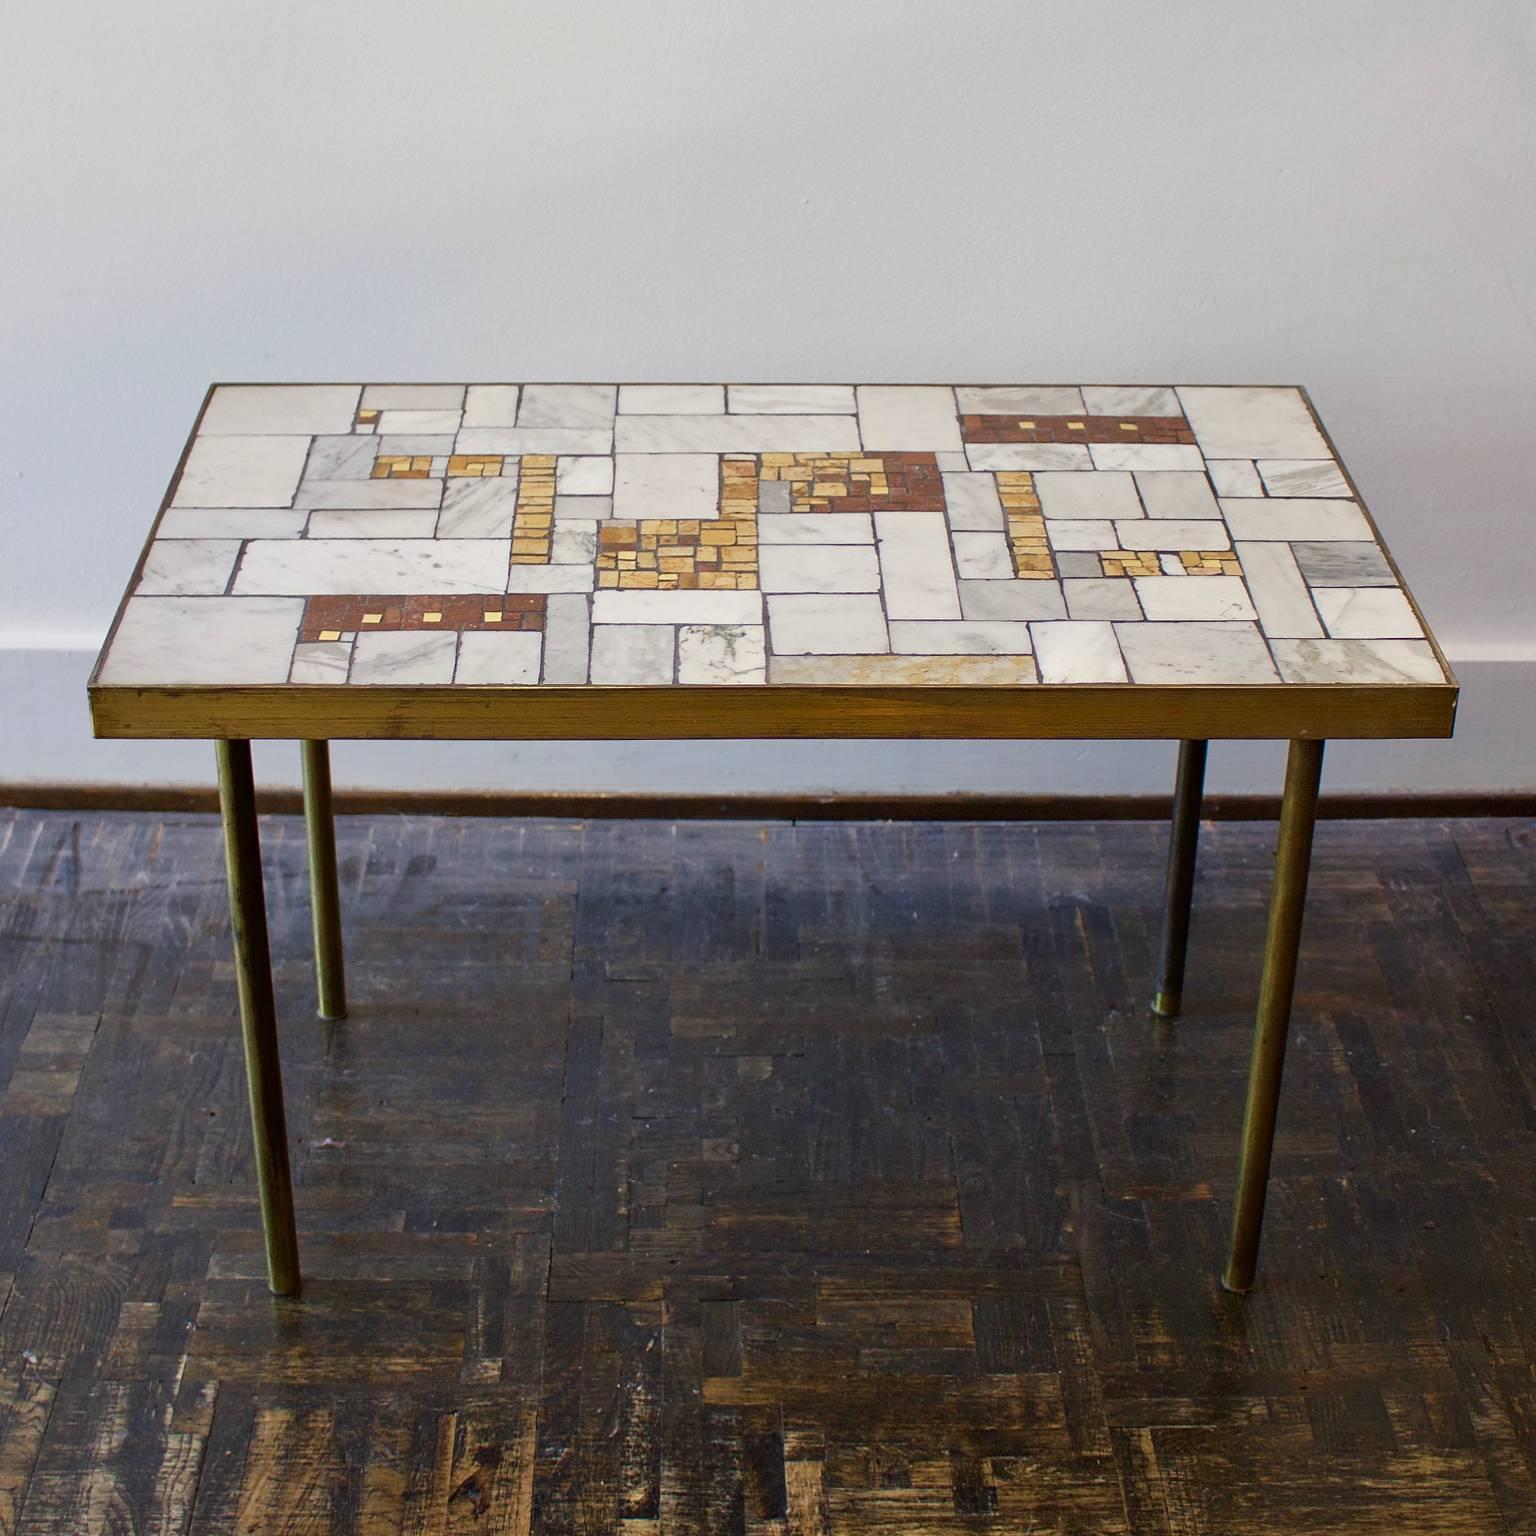 *** Please contact us for availability of this piece. ***

A marble and brass side table by Berthold Müller, Germany, mid-20th century.

The table is covered in tiles of marble, gold and yellow and red onyx on wood, with a brass or bronze surround.